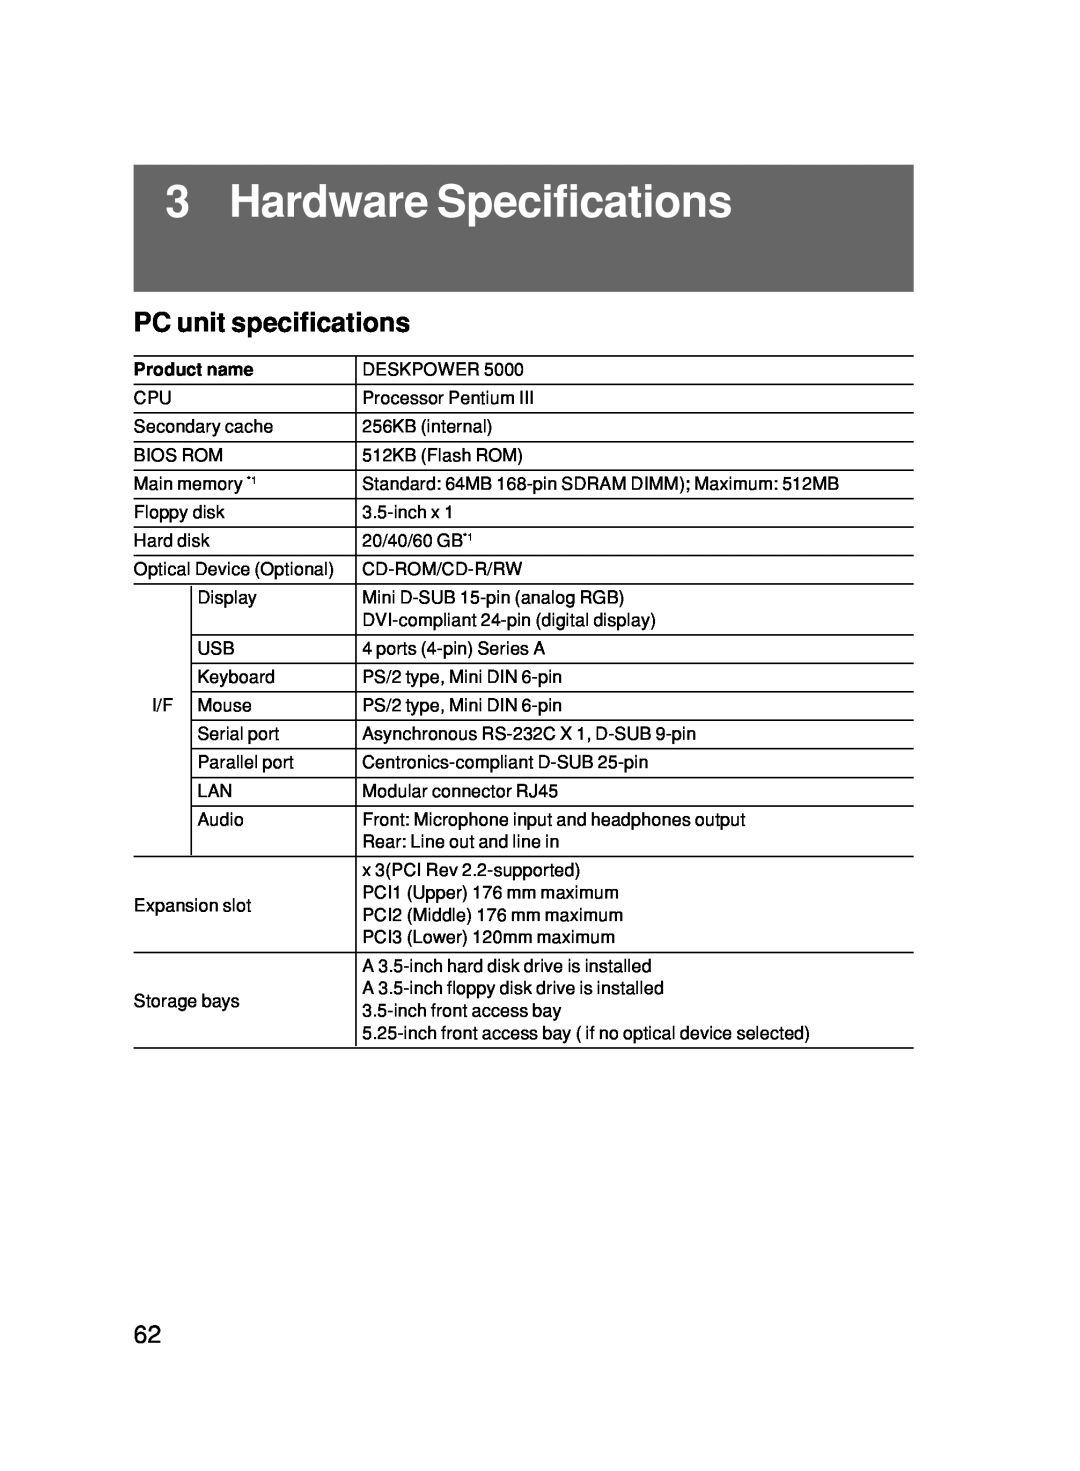 Fujitsu 500 user manual Hardware Specifications, PC unit specifications, Product name 